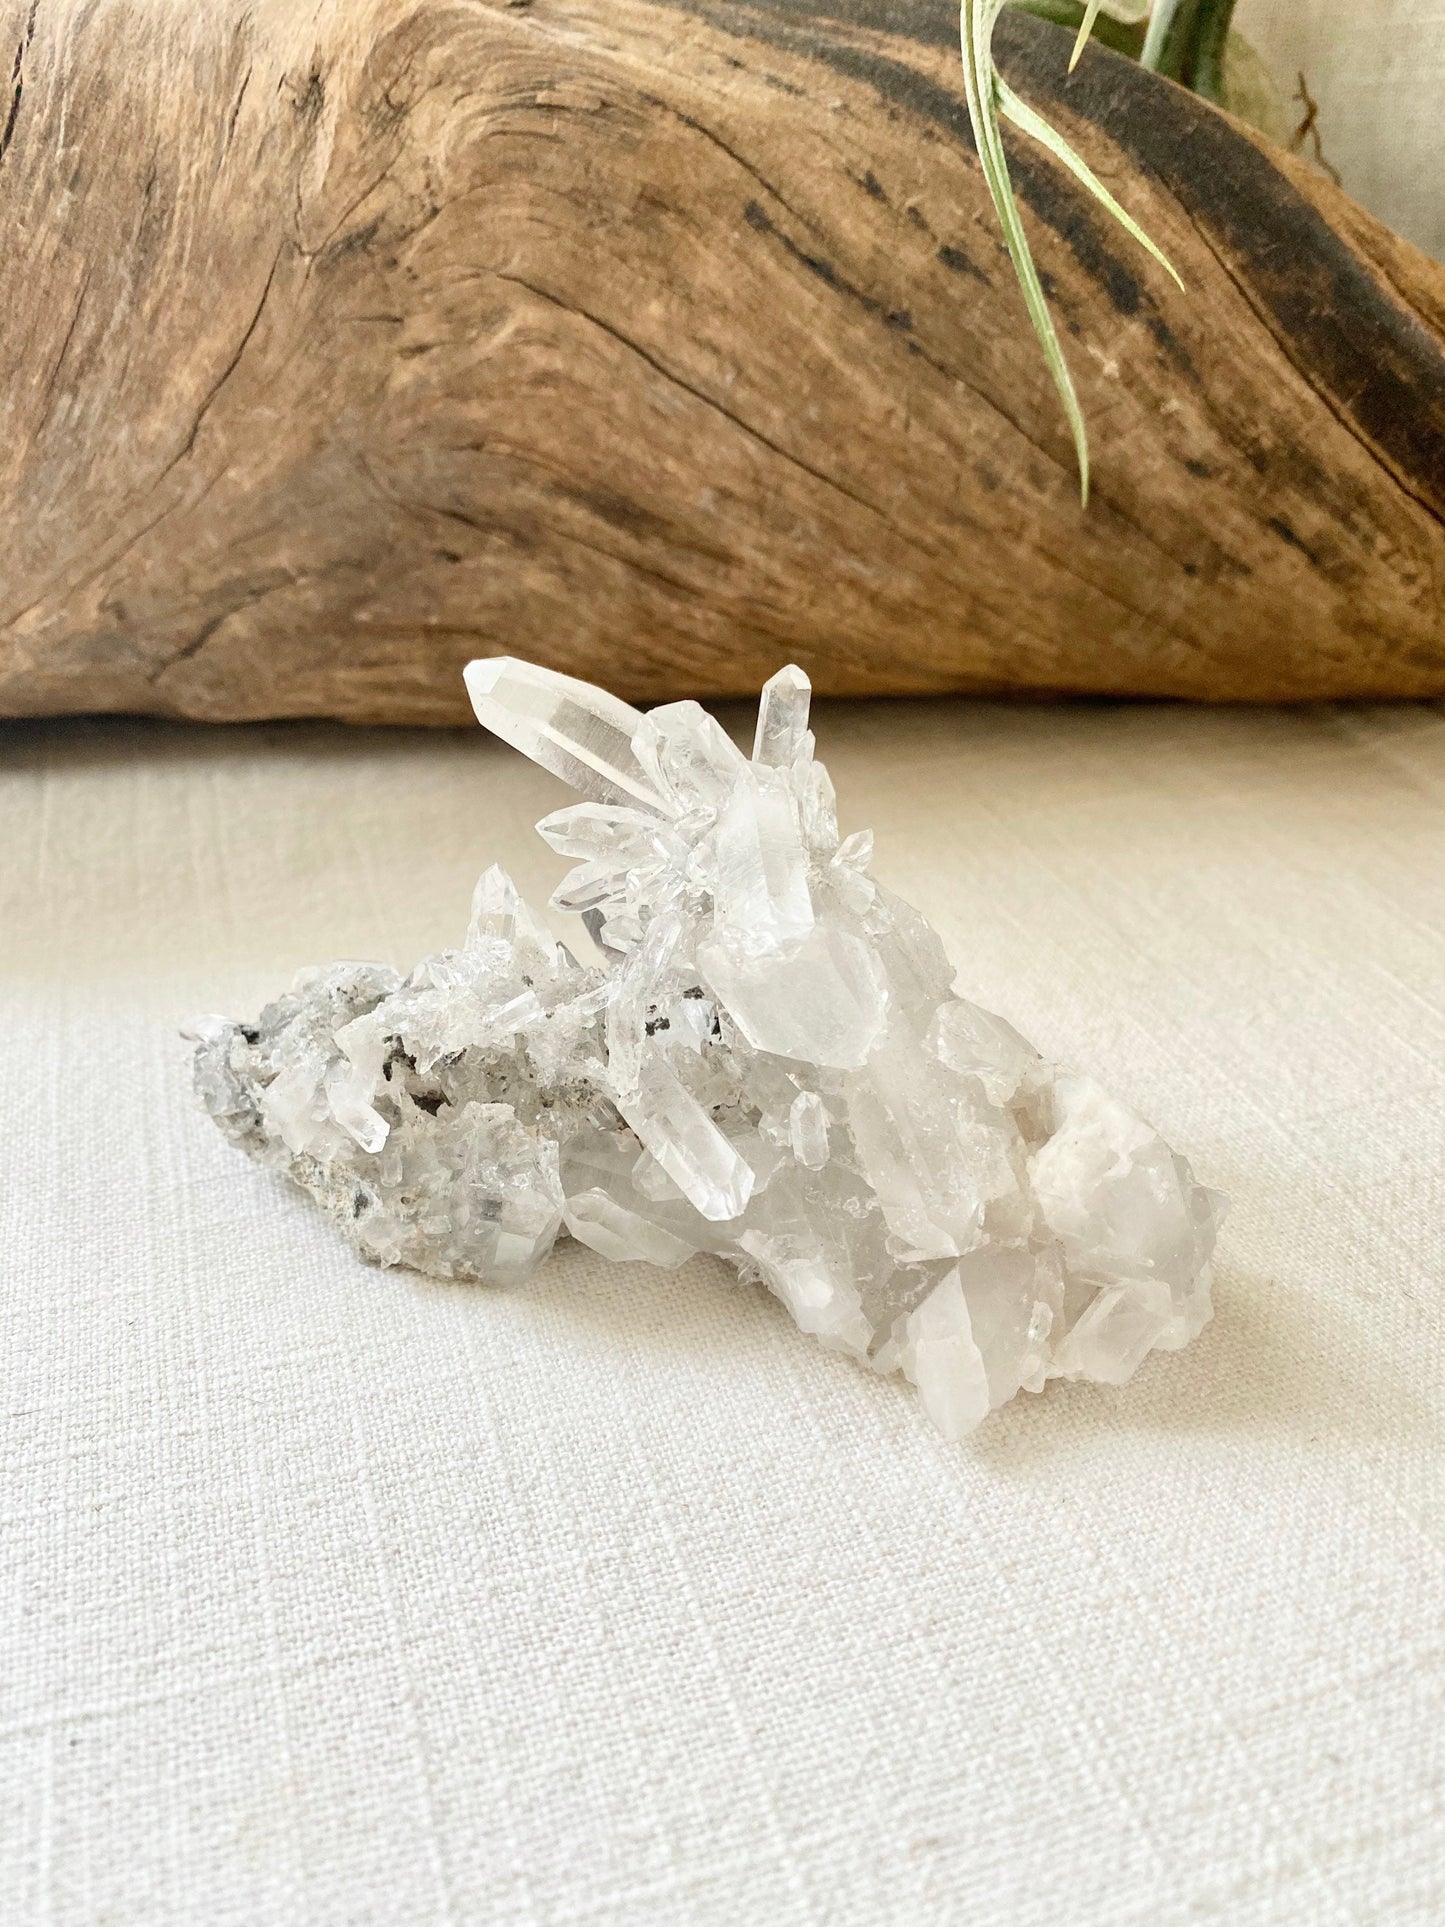 Clear Quartz Crystal Point Cluster with long slender points, double termination - Rock Shop